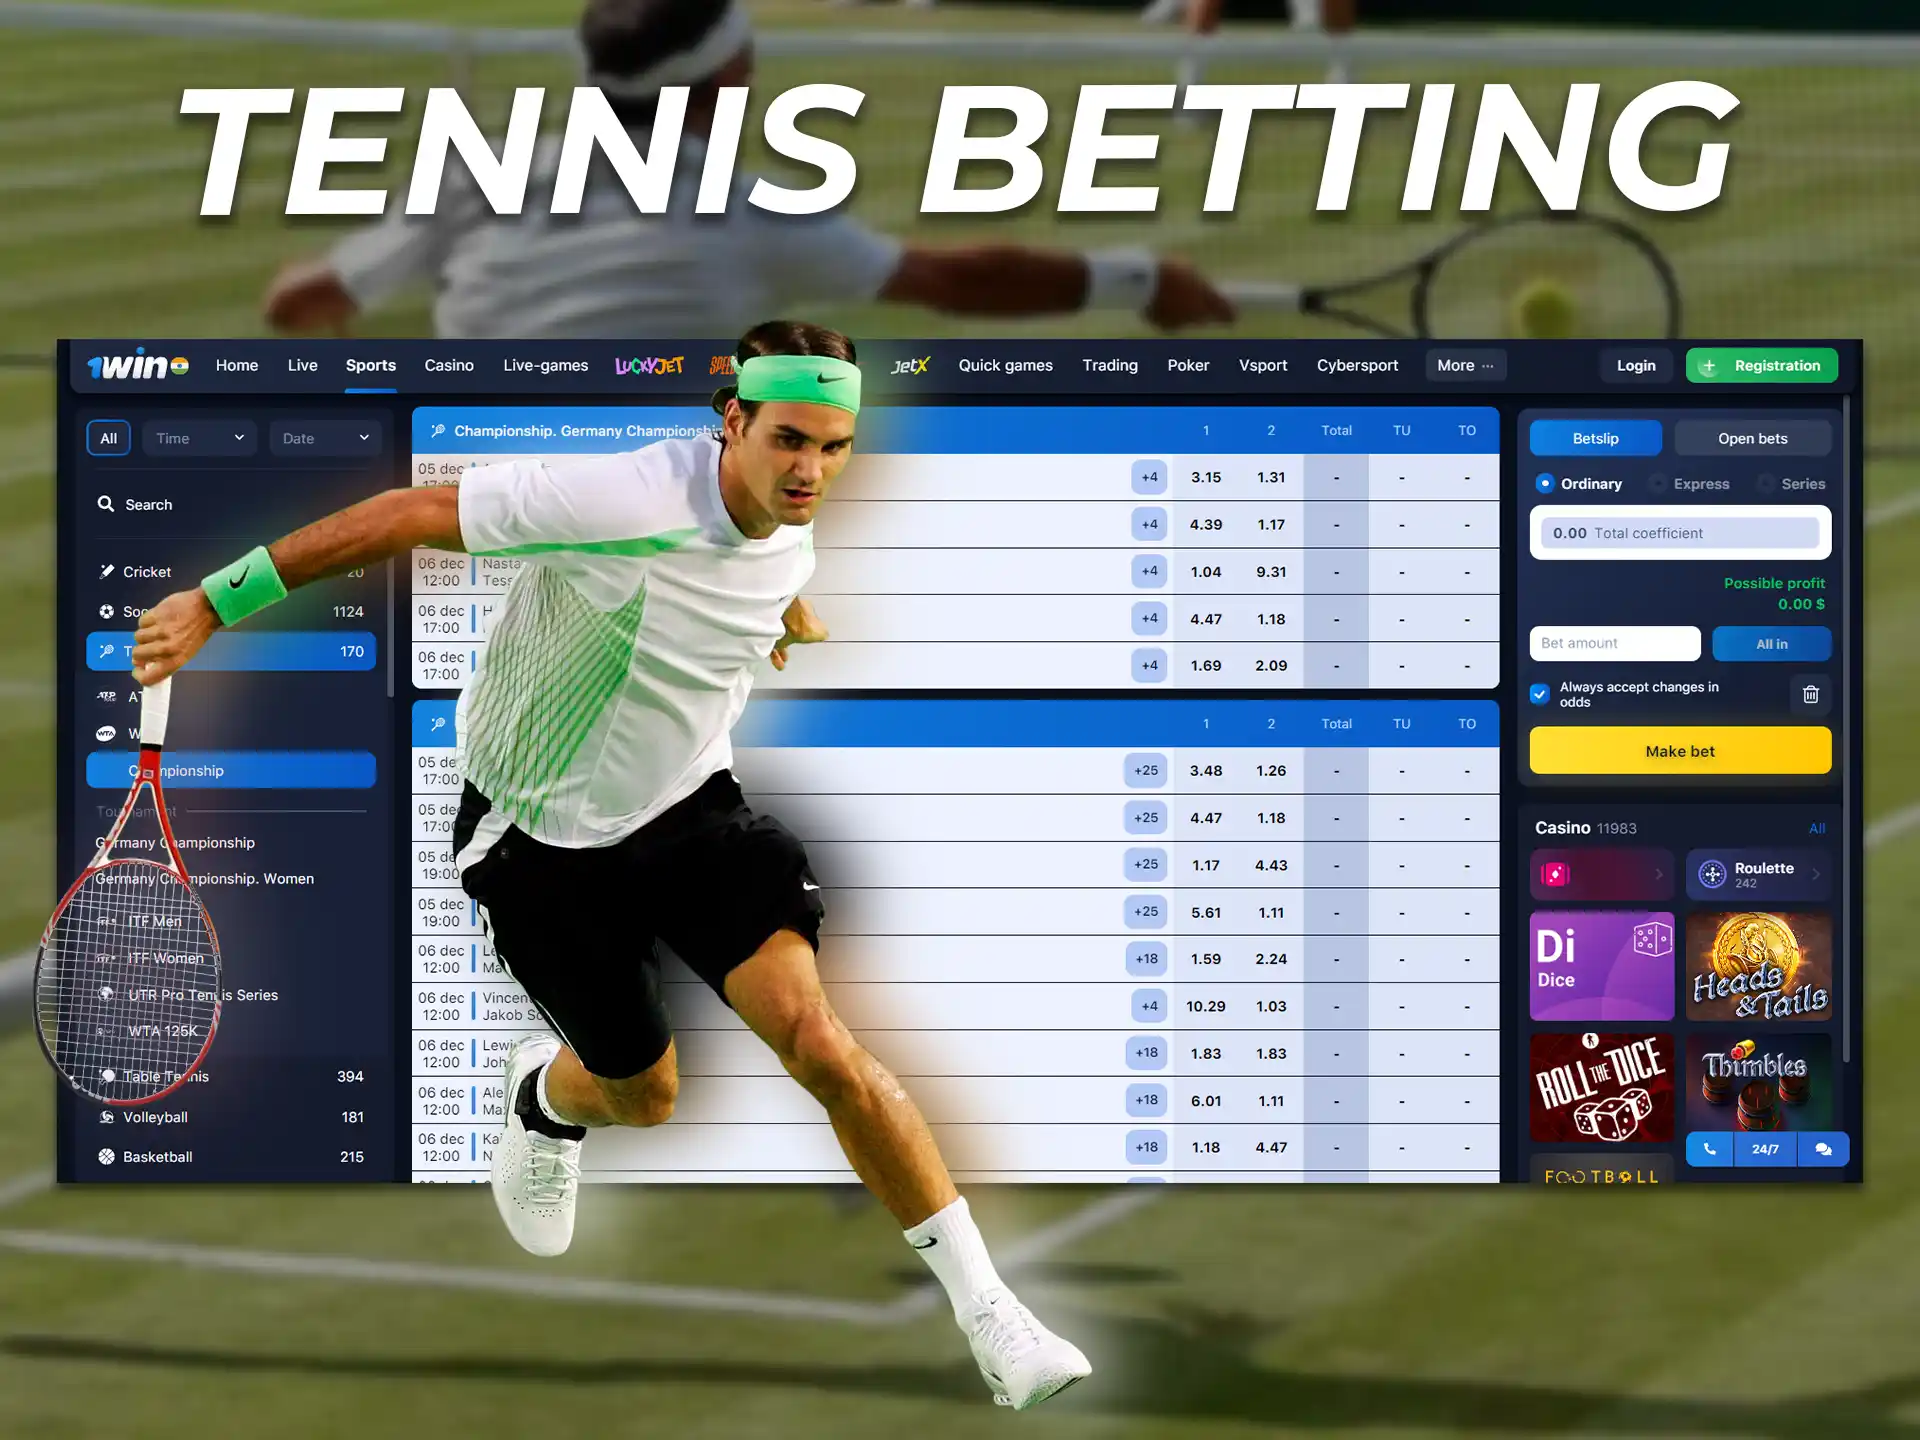 Betting on tennis is popular among Indian bettors.